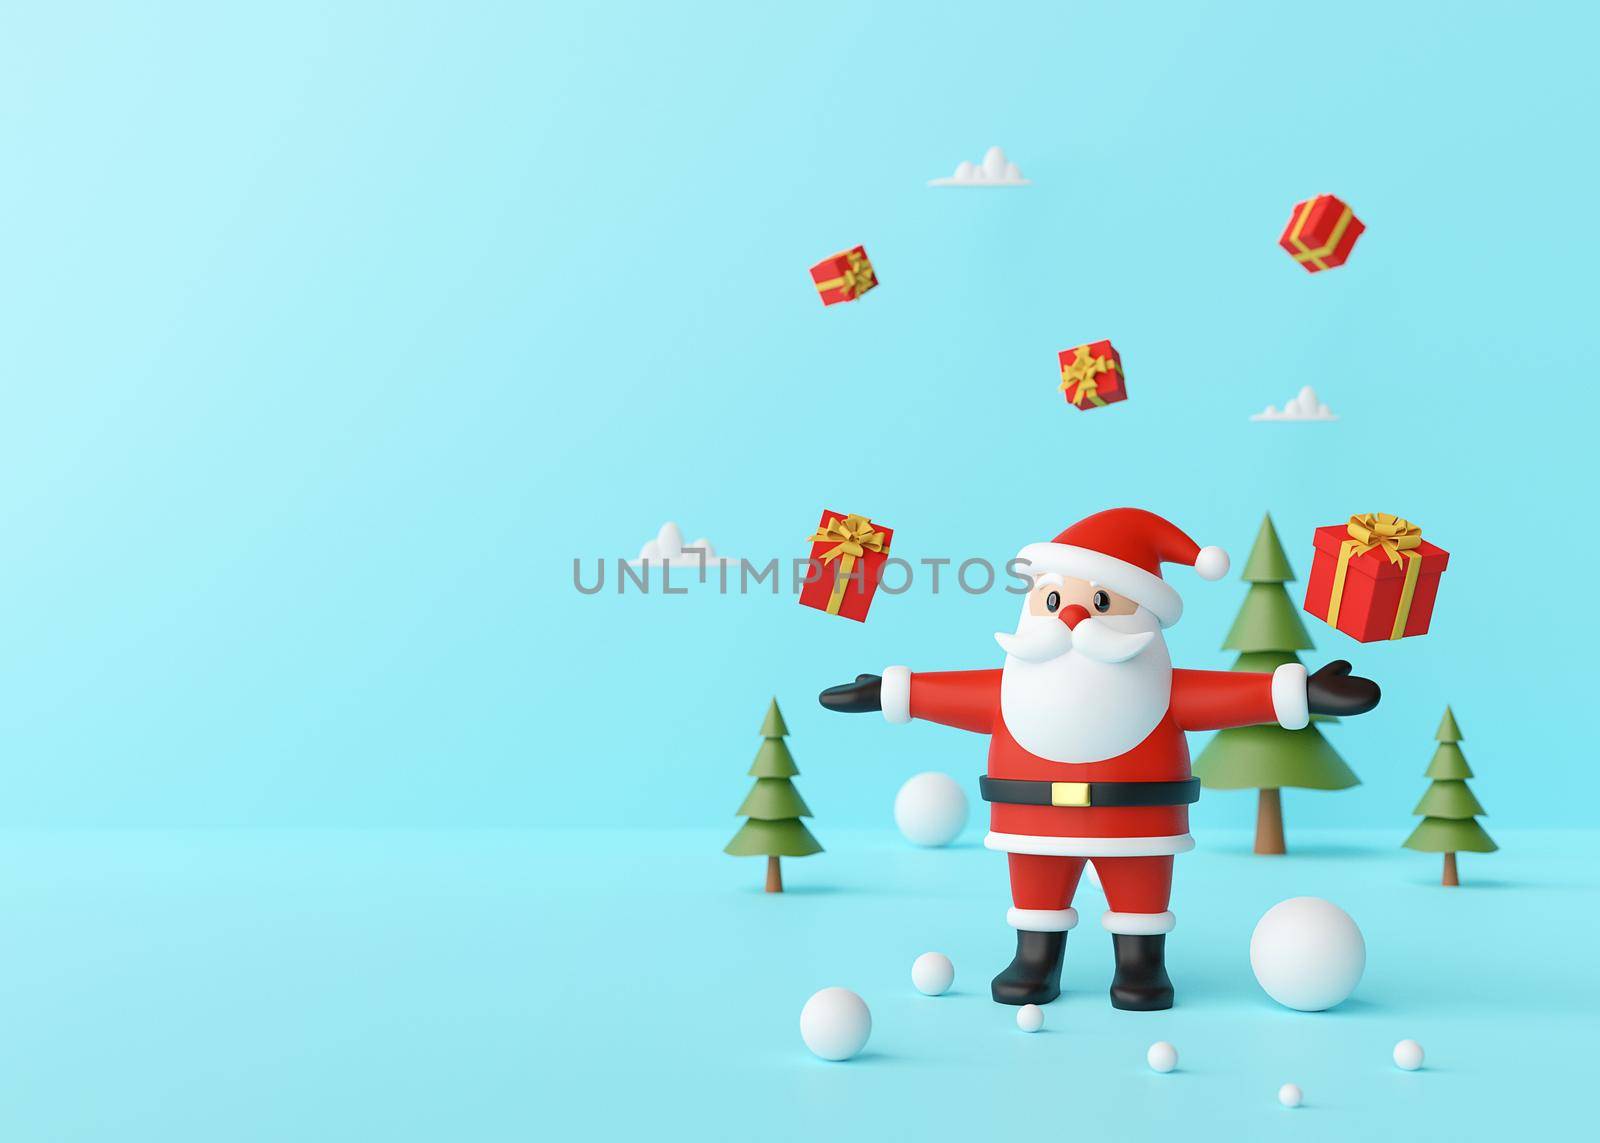 Merry Christmas, Santa Claus enjoying with christmas gifts on a blue background, 3d rendering by nutzchotwarut